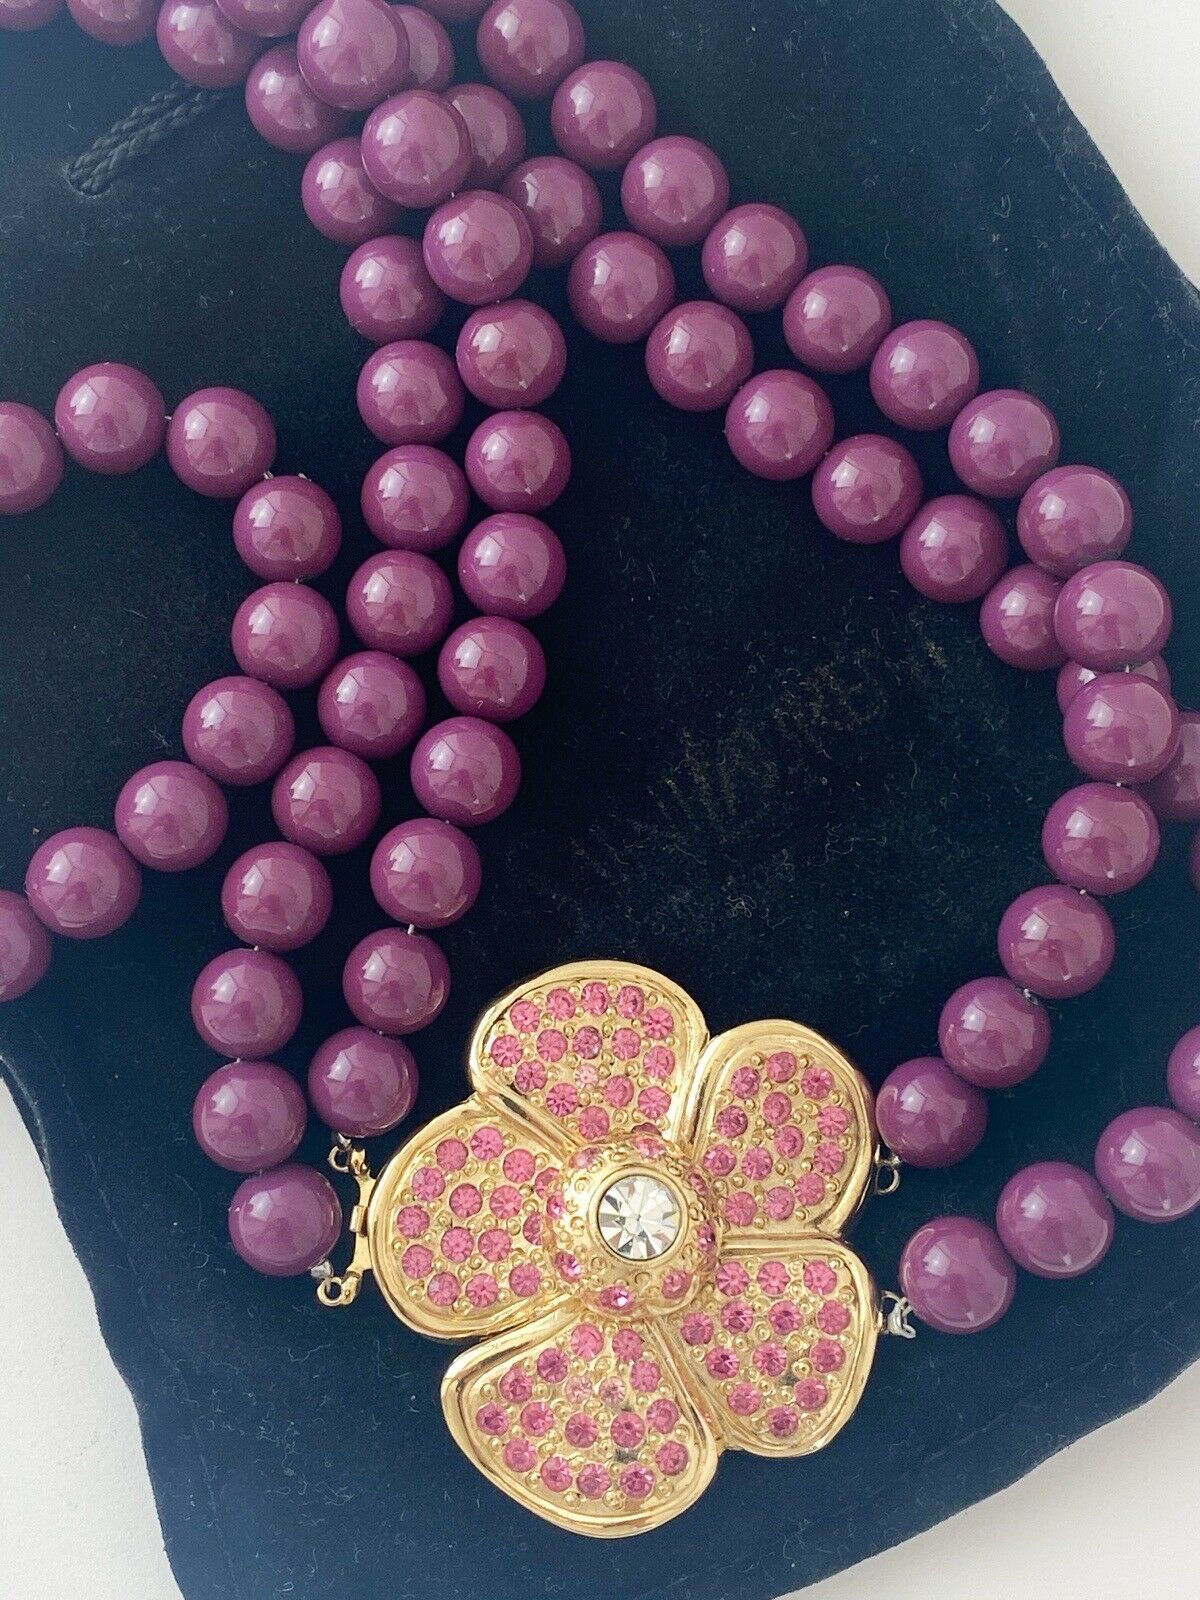 【SOLD OUT】YSL Yves Saint Laurent Vintage Gold Tone Flower Beaded Necklace Purple